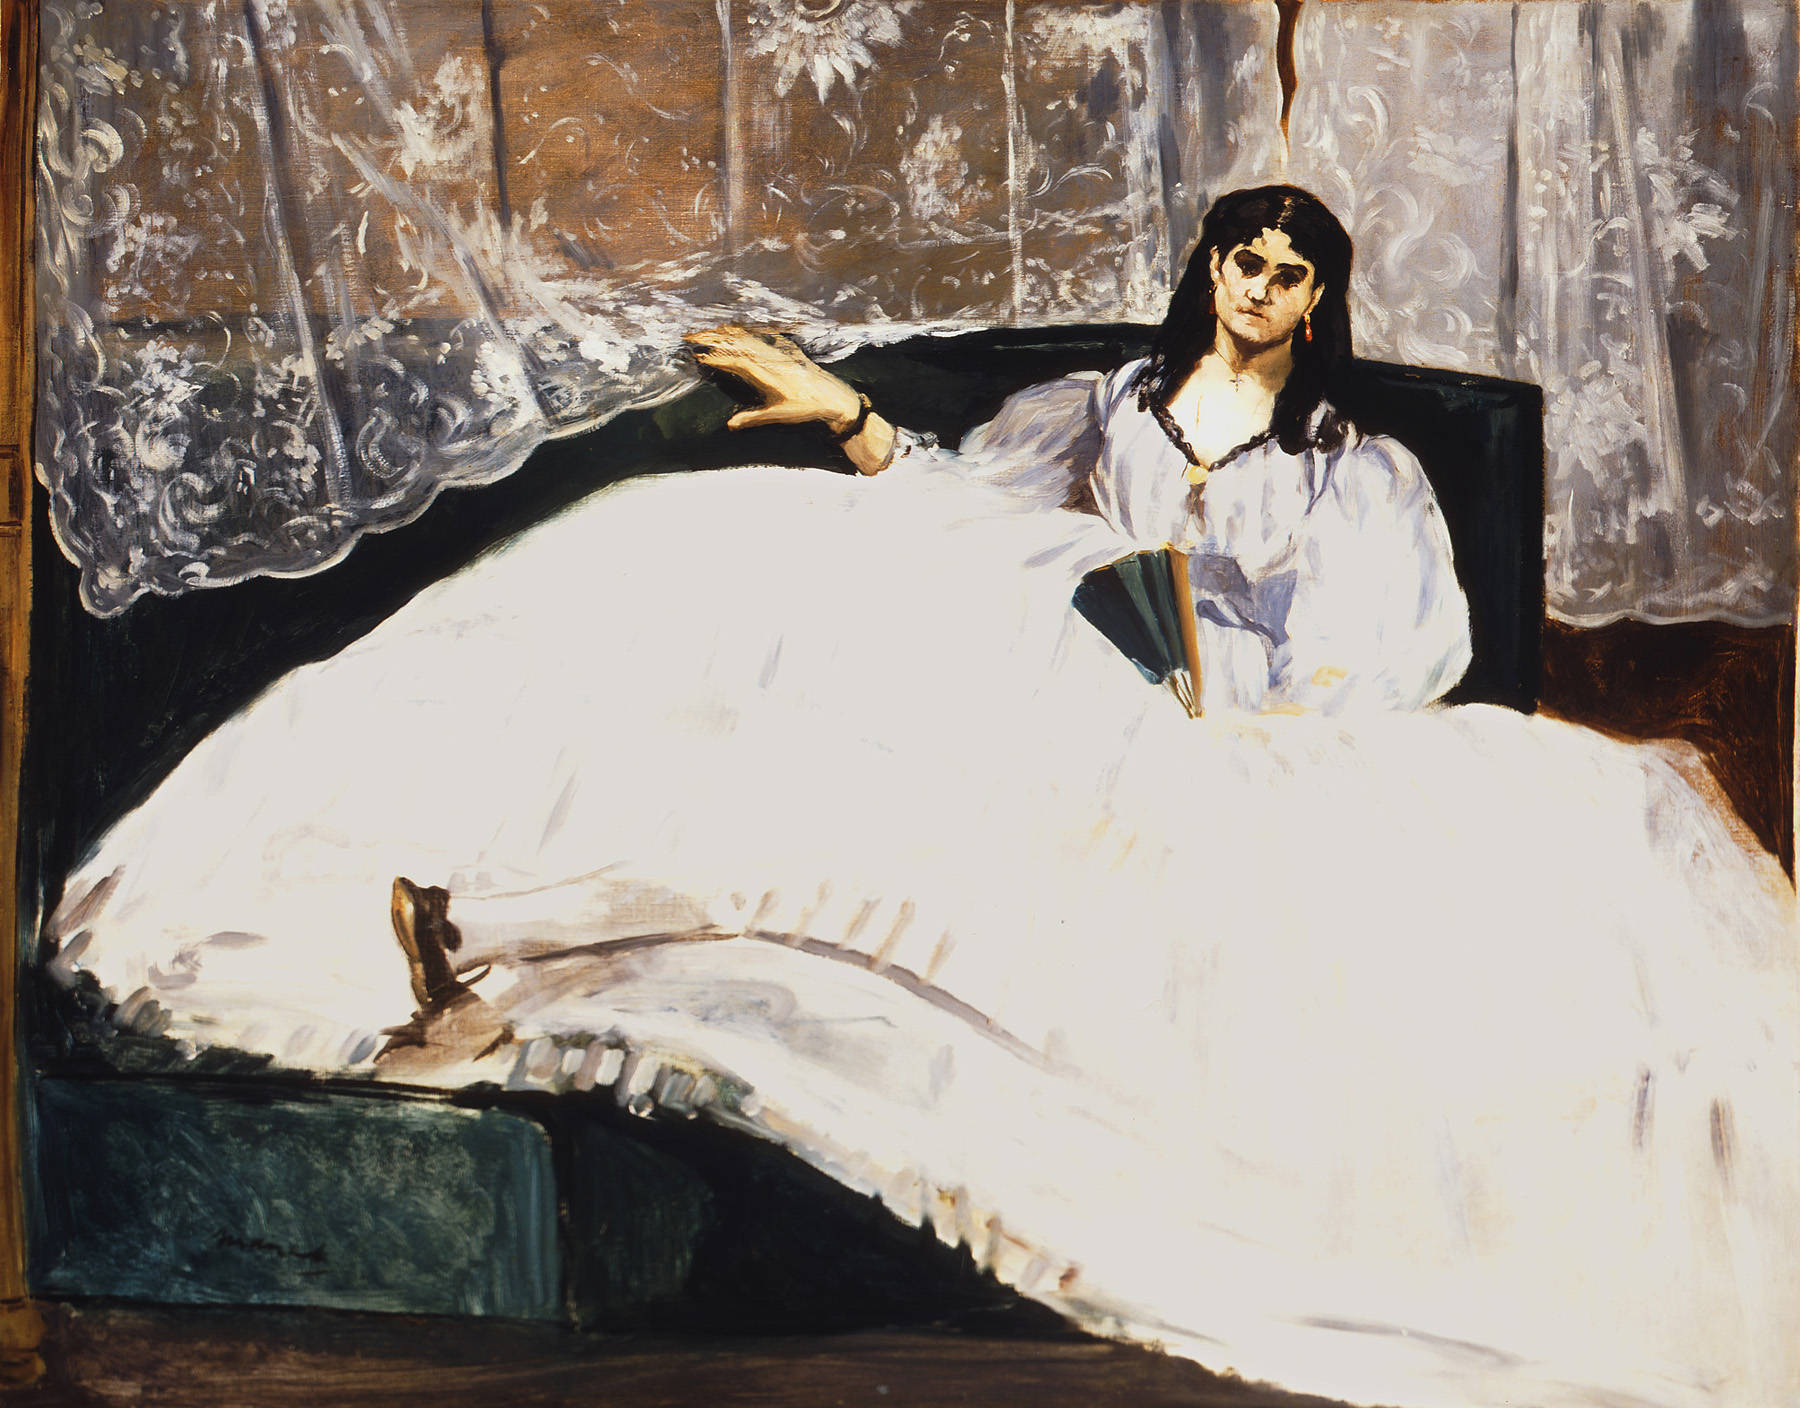 Ritratto di Jeanne Duval by Édouard Manet - 1862 - 113 x 90 cm 